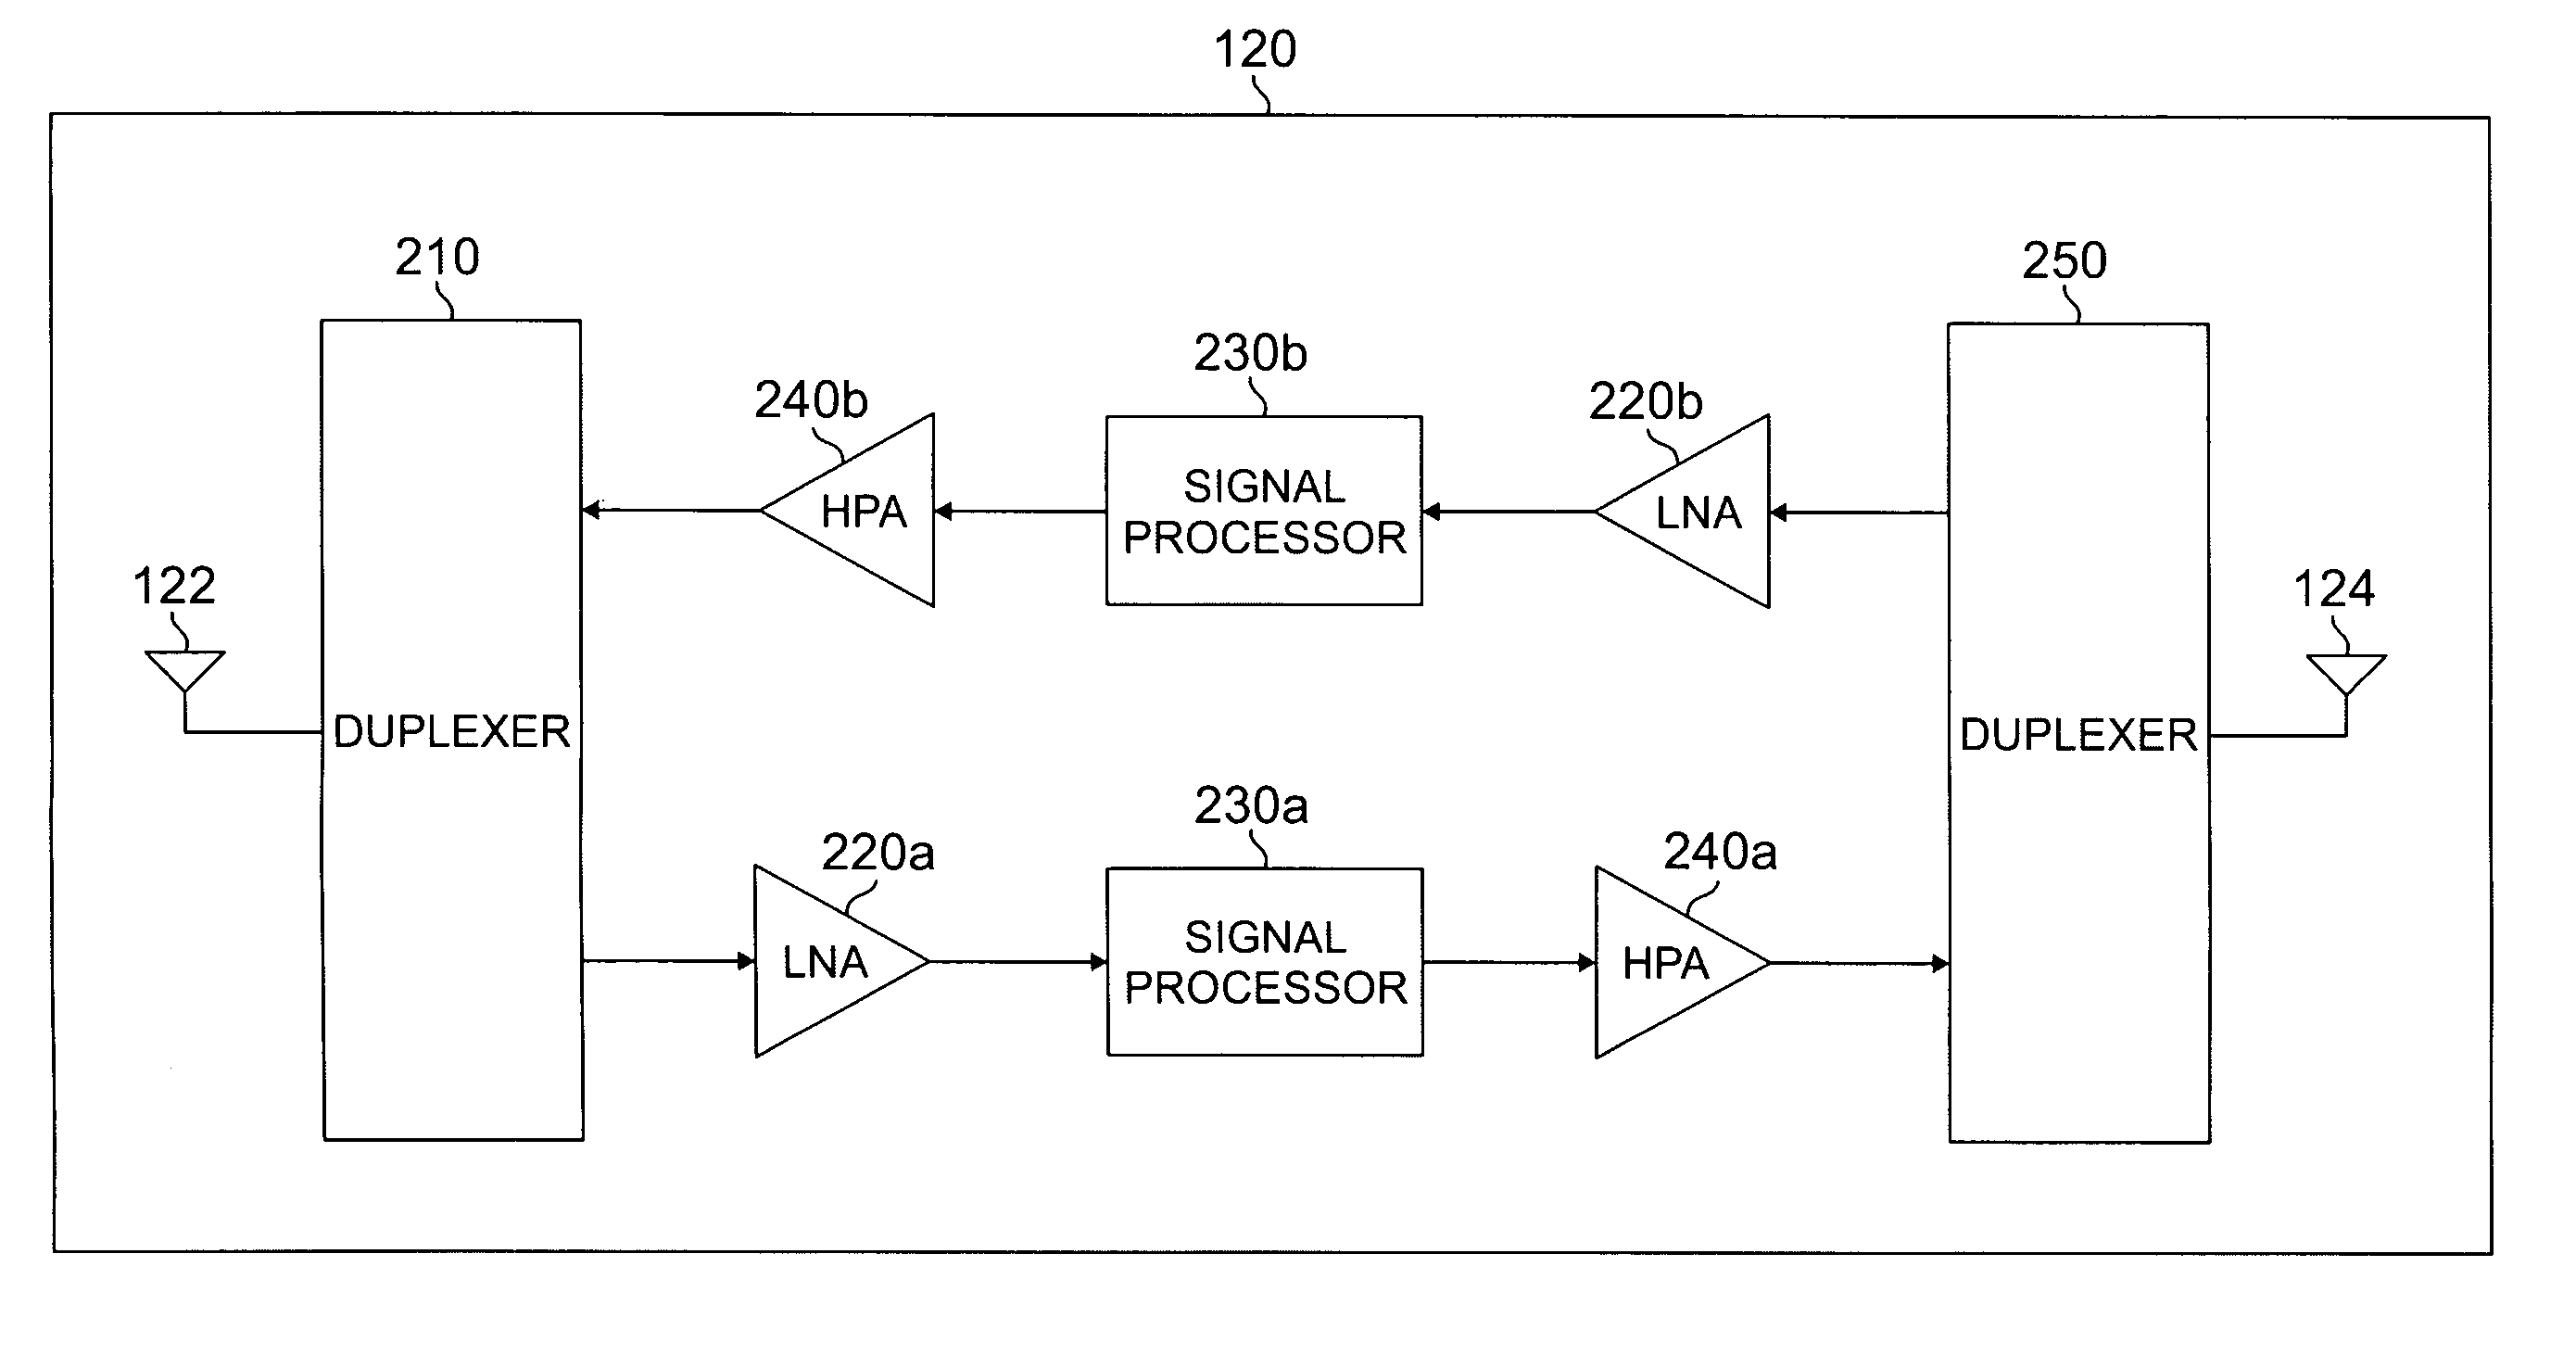 Wireless repeater using cross-polarized signals to reduce feedback in an FDD wireless network